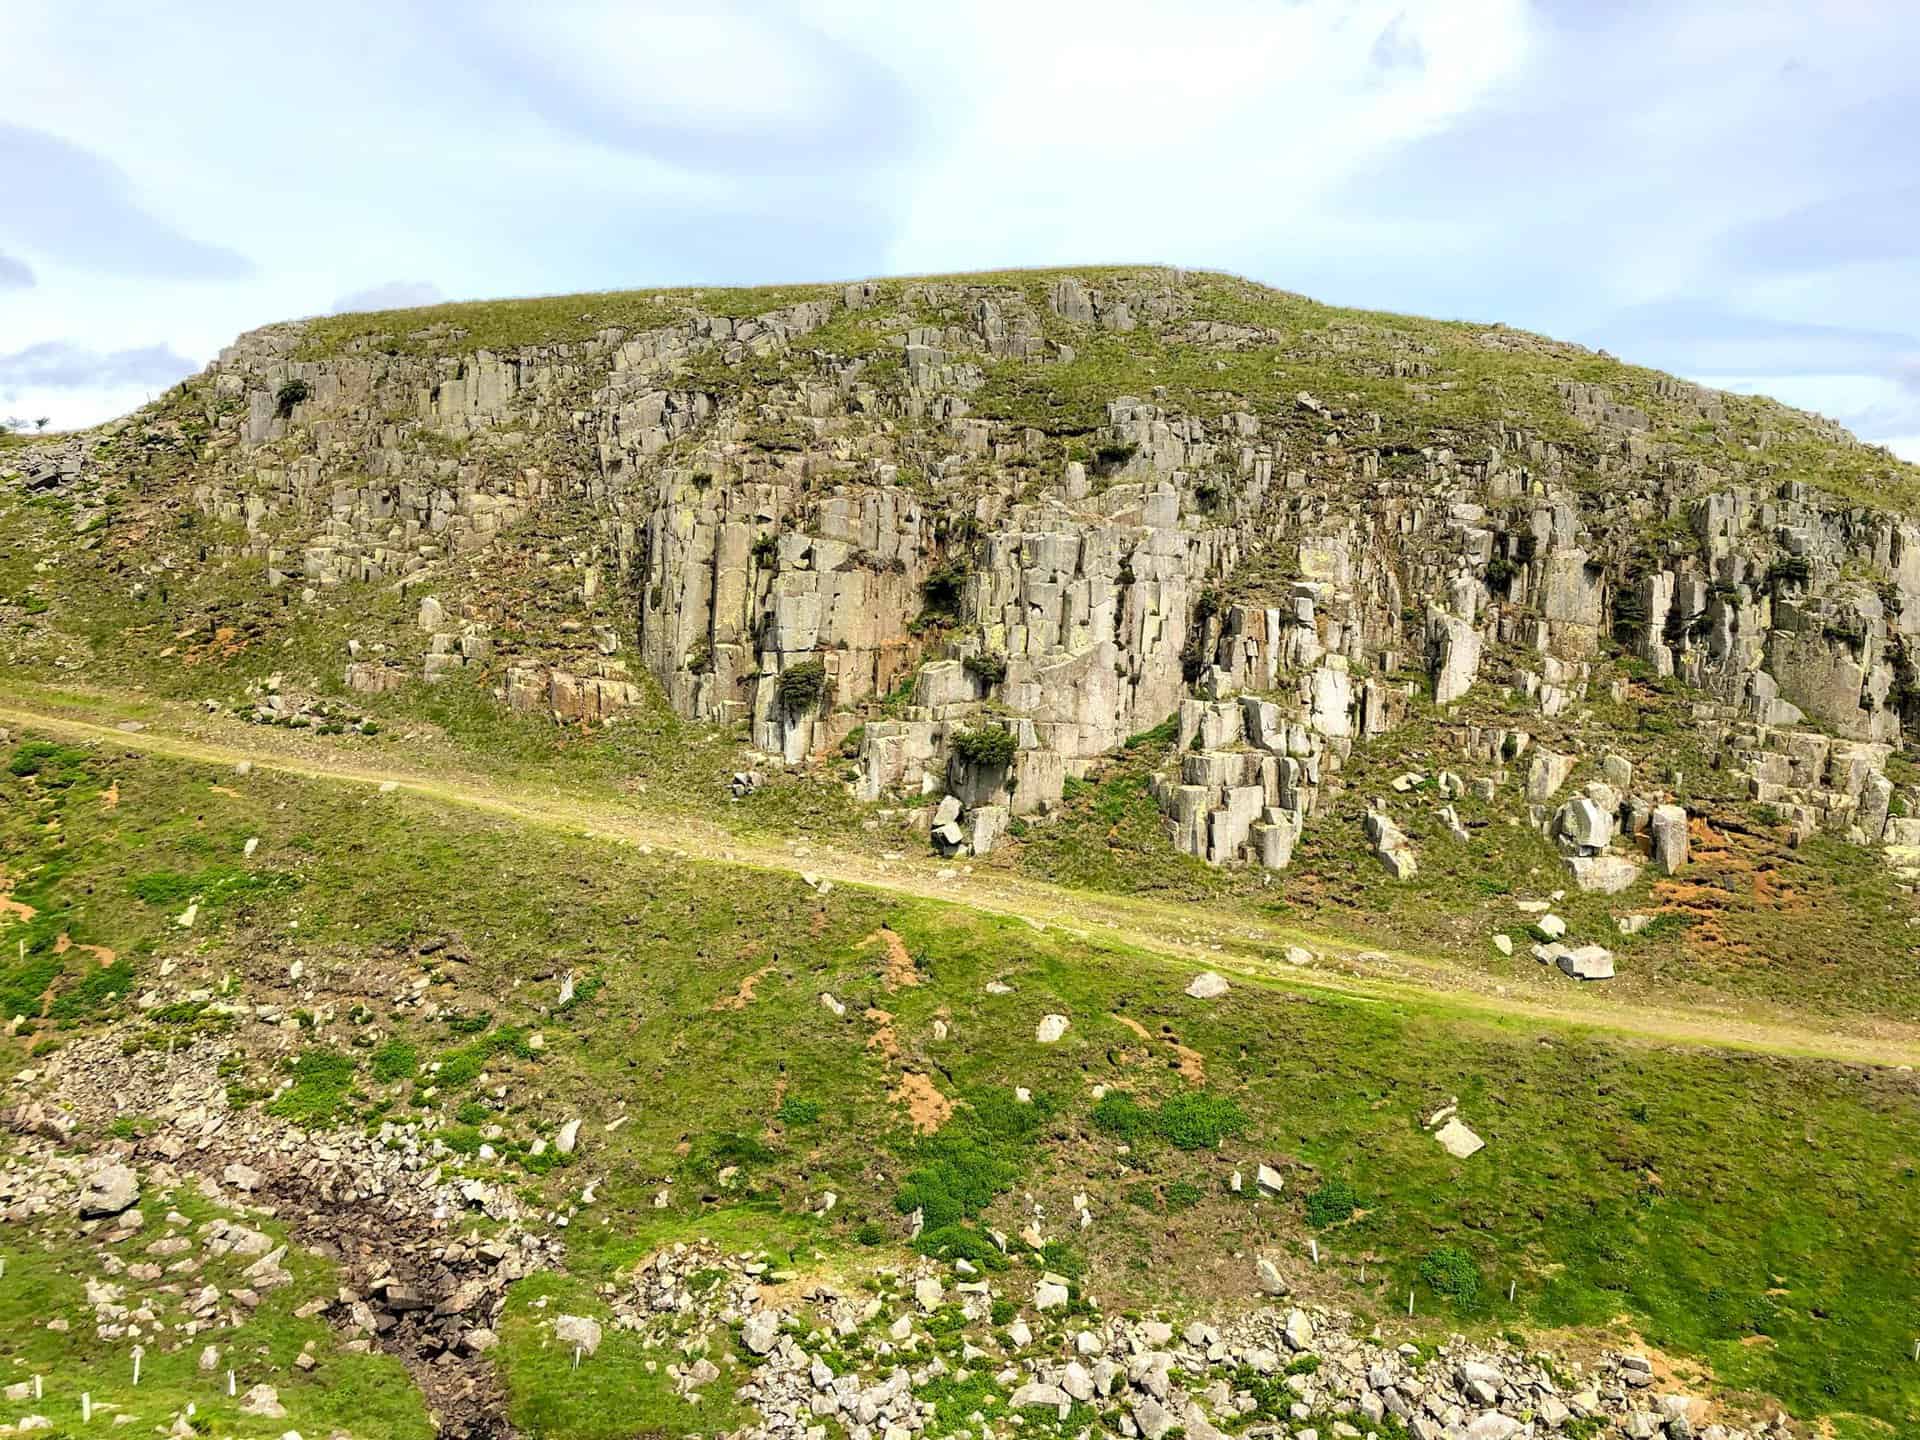 Holwick Scars, a rugged limestone landscape known for its dramatic views and geological interest.